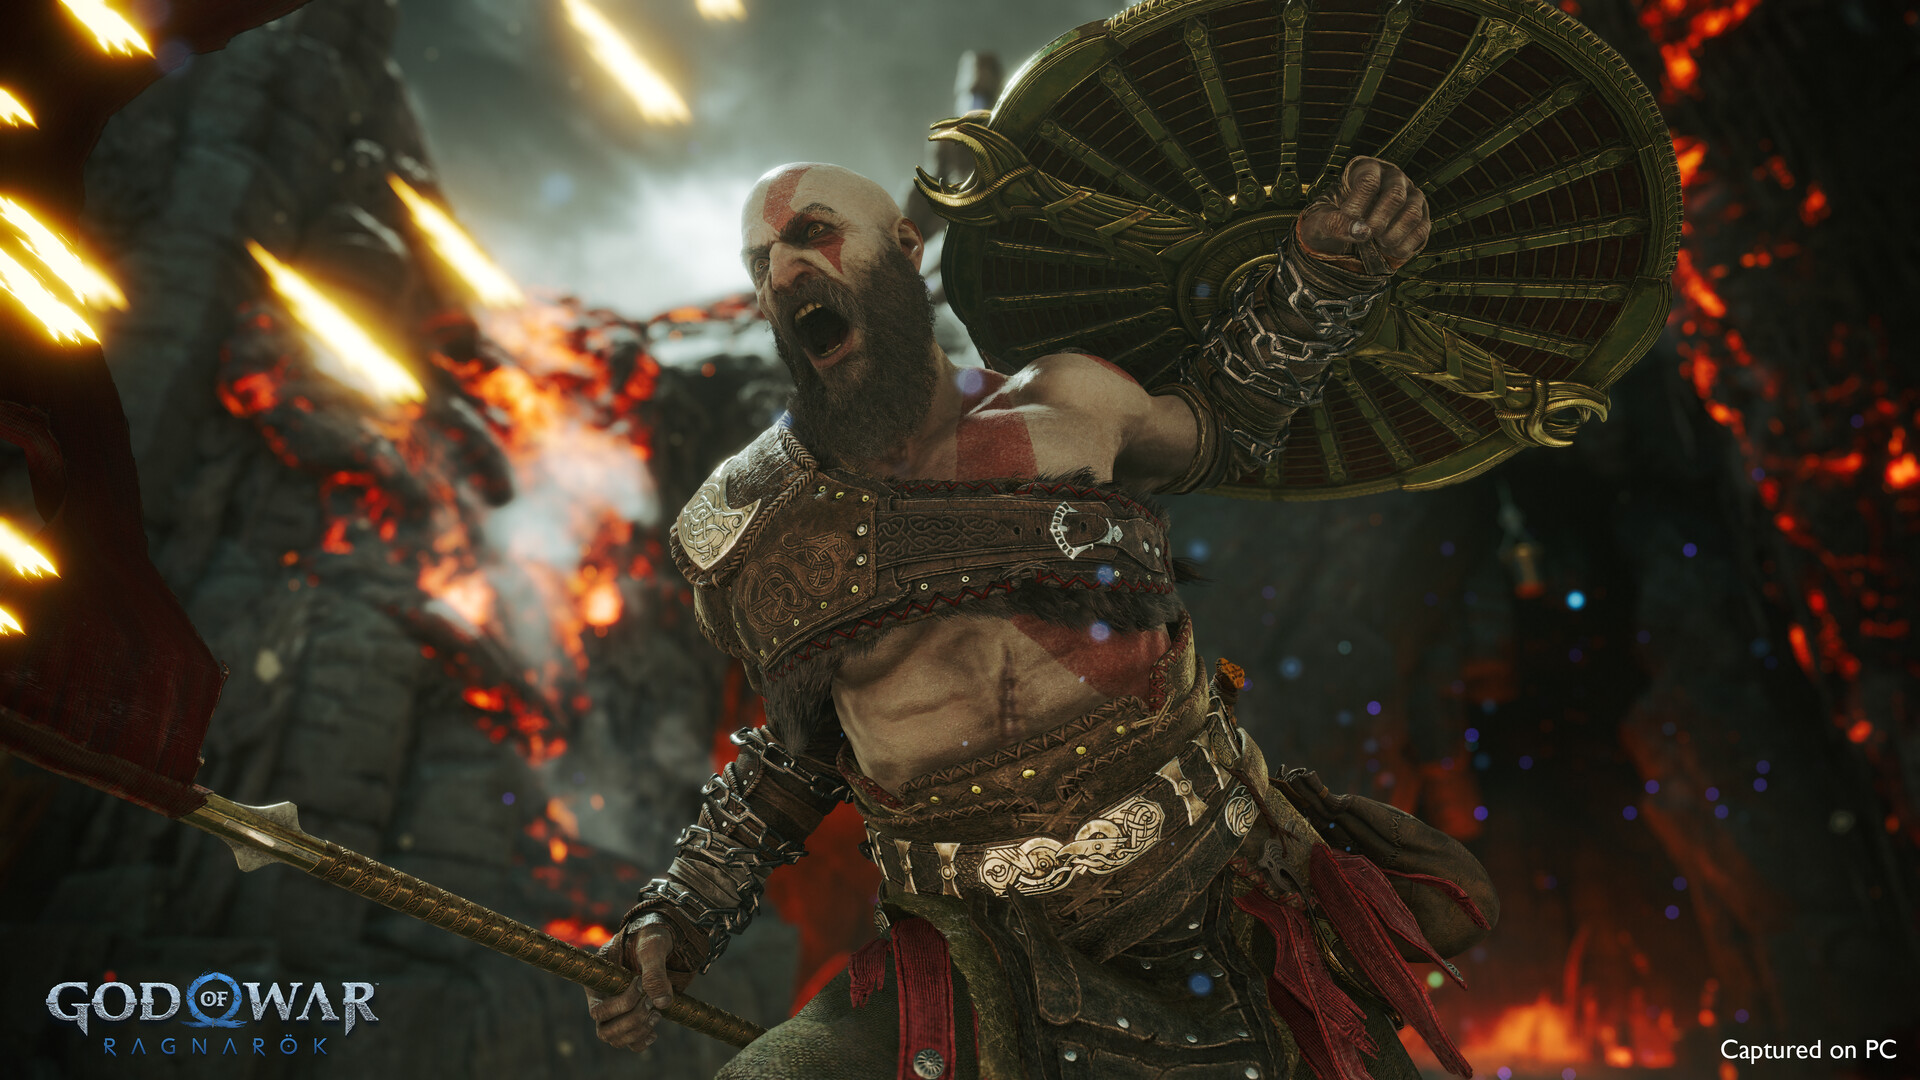 God of War Ragnarok is coming to PC this year